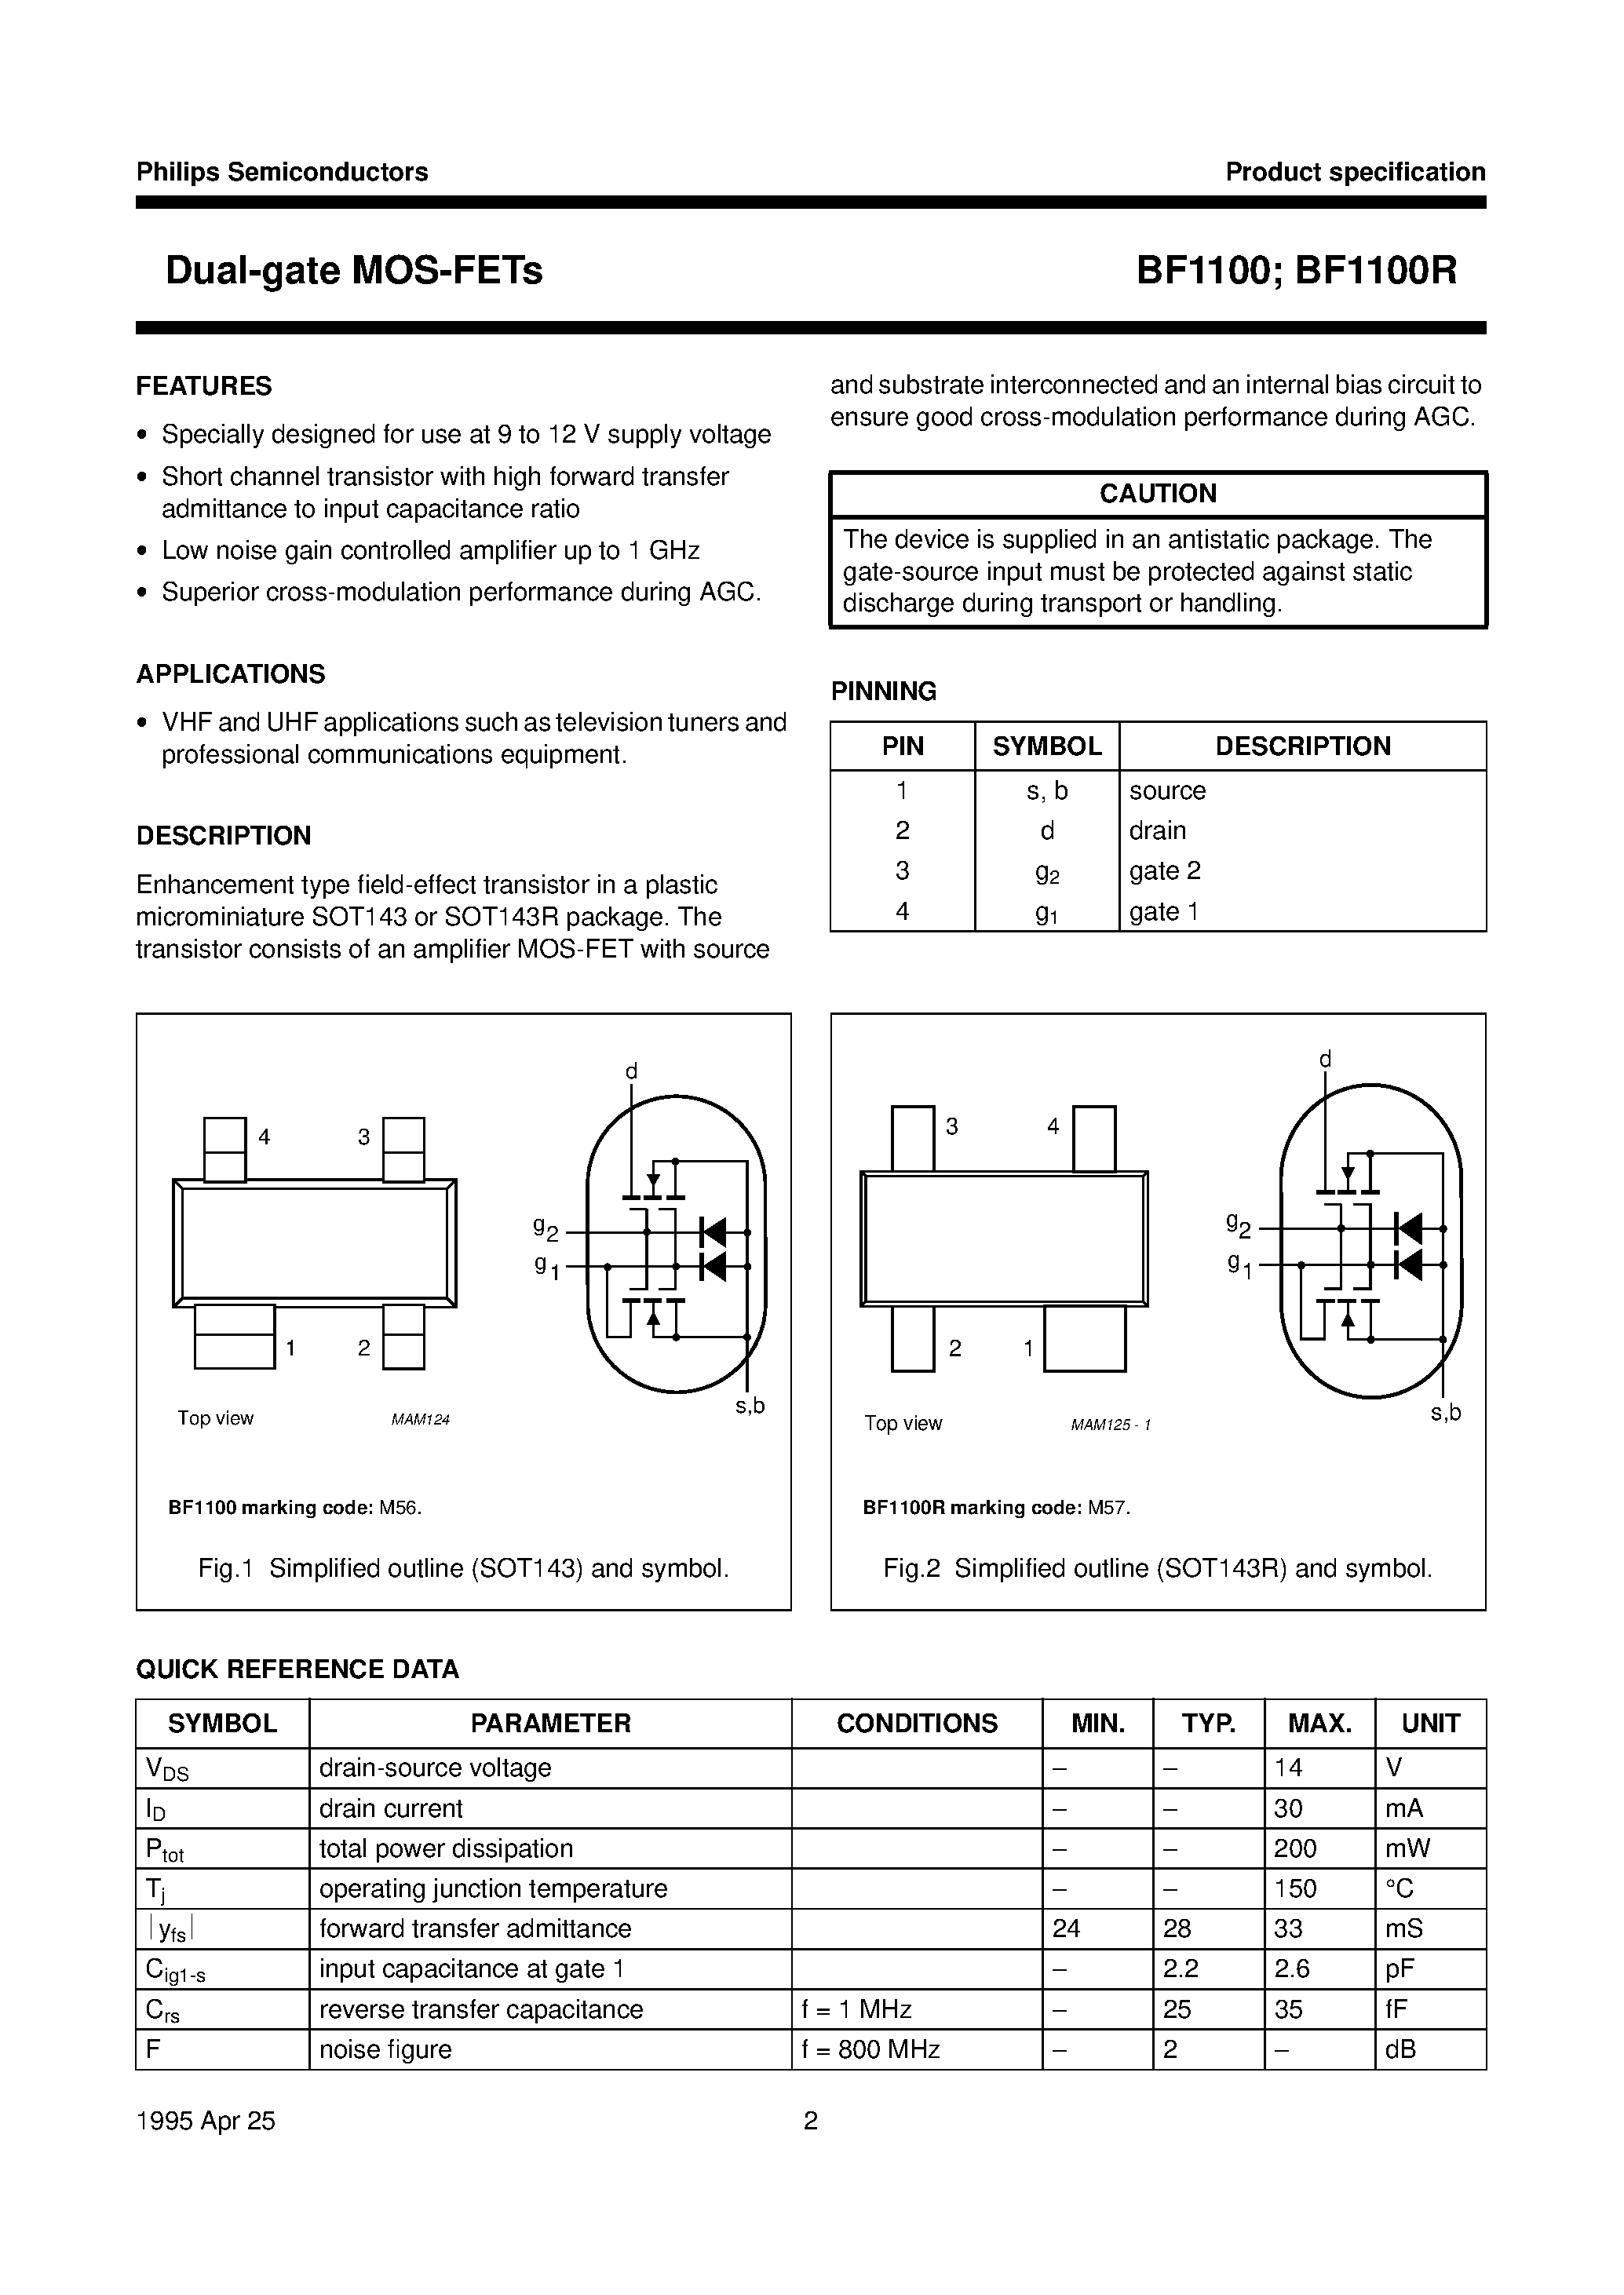 Datasheet BF1100 - Dual-gate MOS-FETs page 2